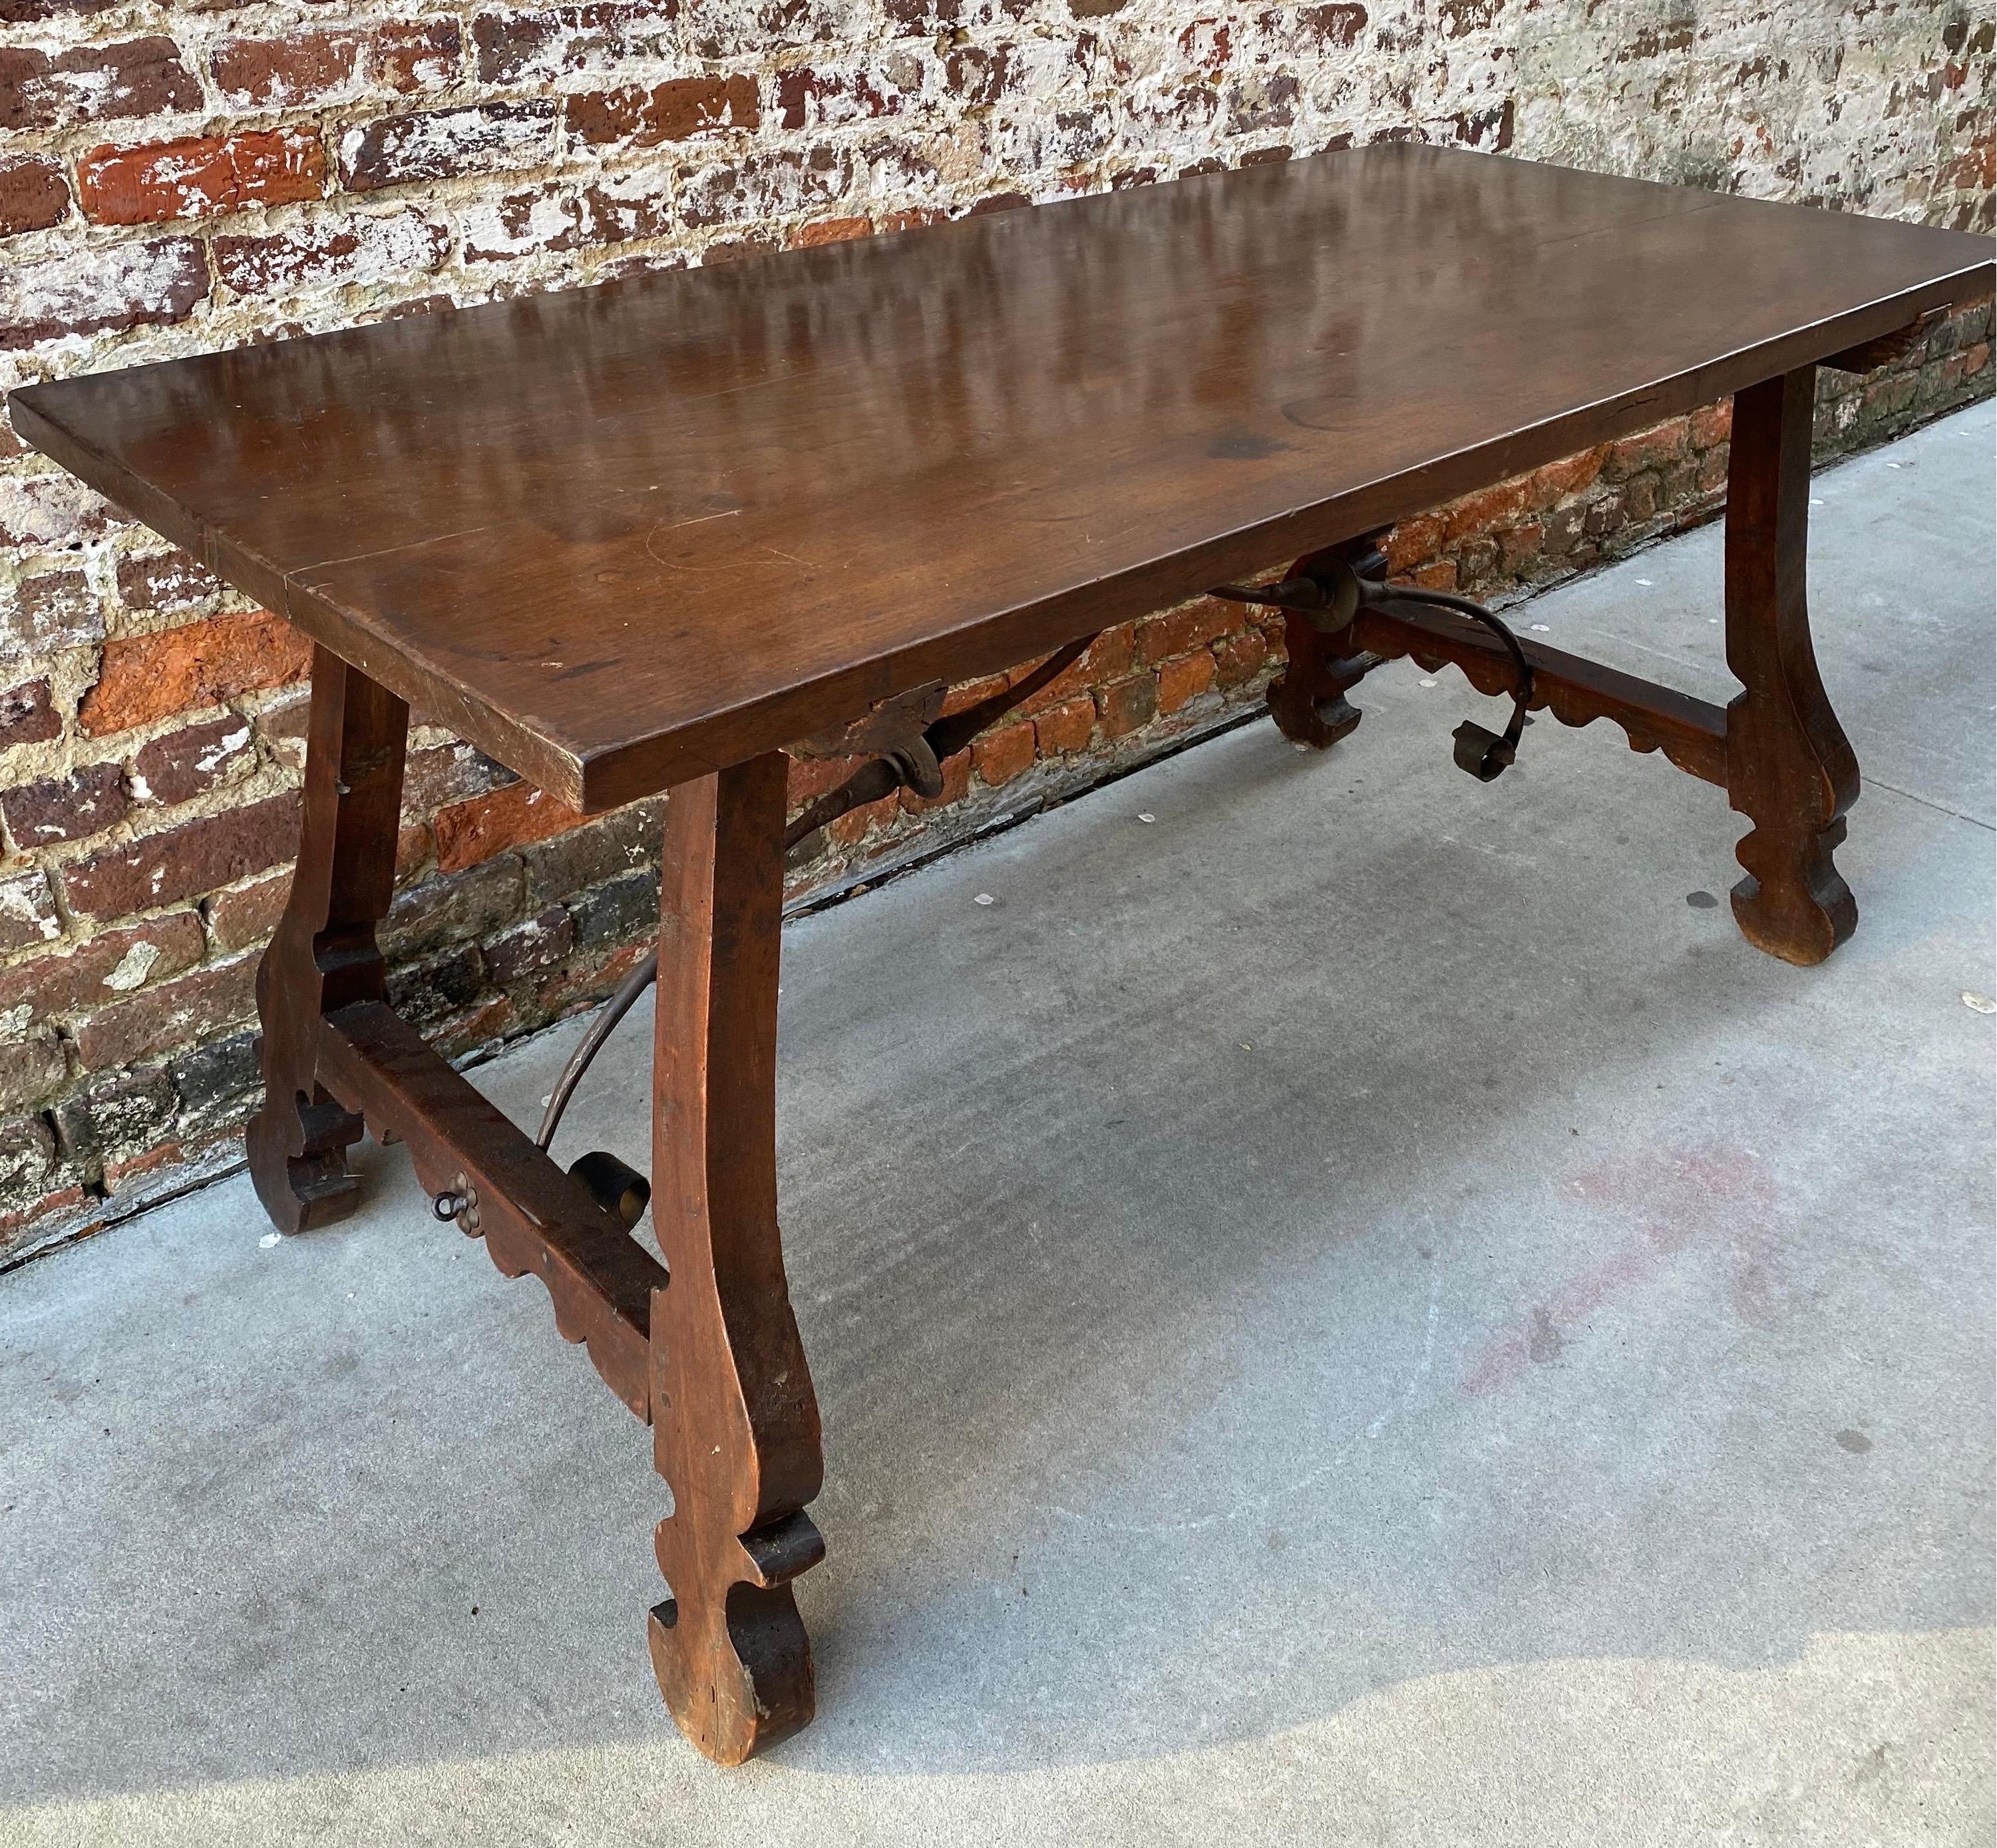 Spanish farm table with iron accents at base. Great for use as table or desk.